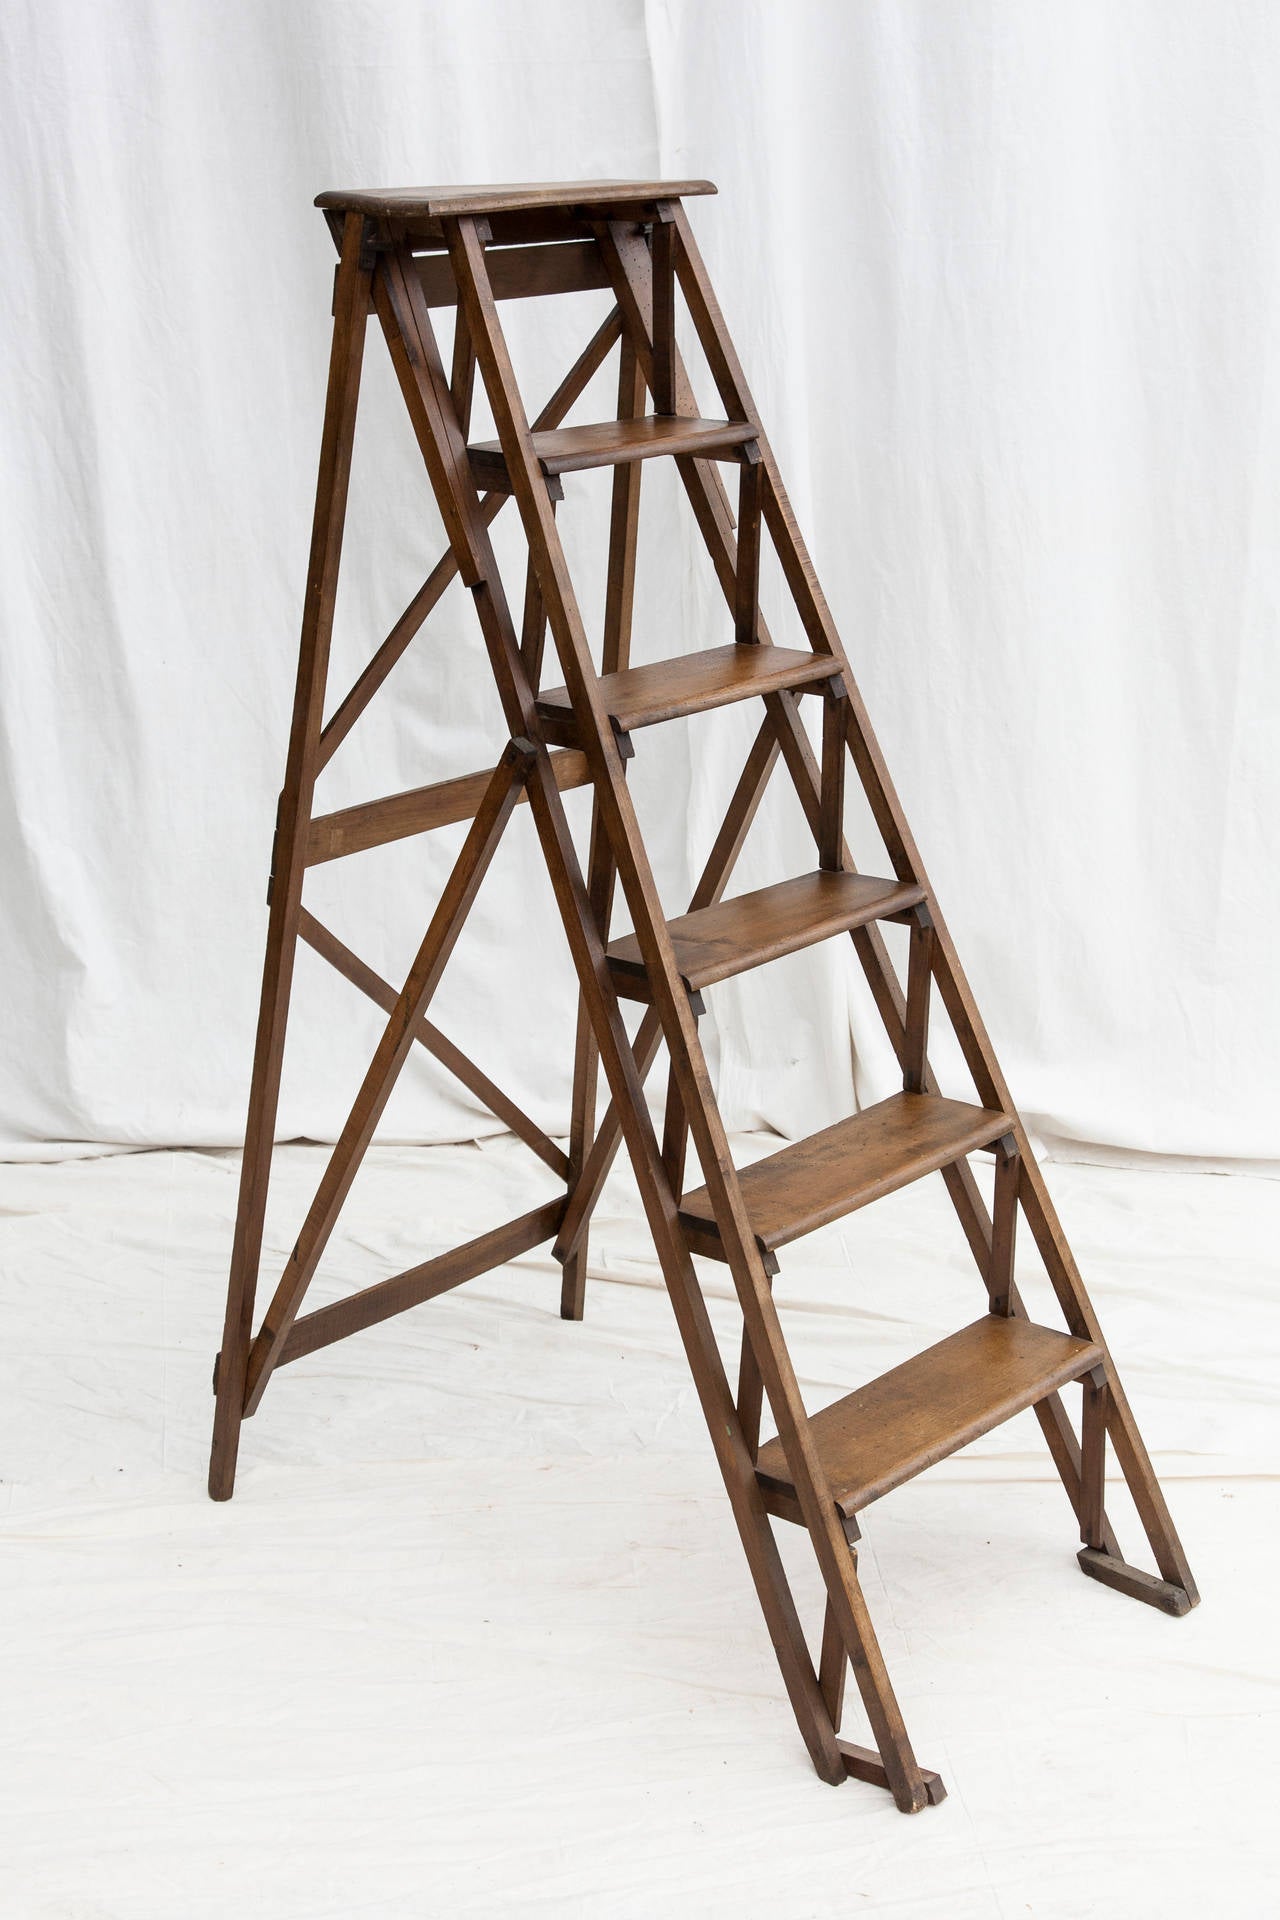 This artisan-made library ladder is a functioning piece ready for a home office or library and would also make a charming display piece with the steps serving as shelves. Beech, circa 1940.